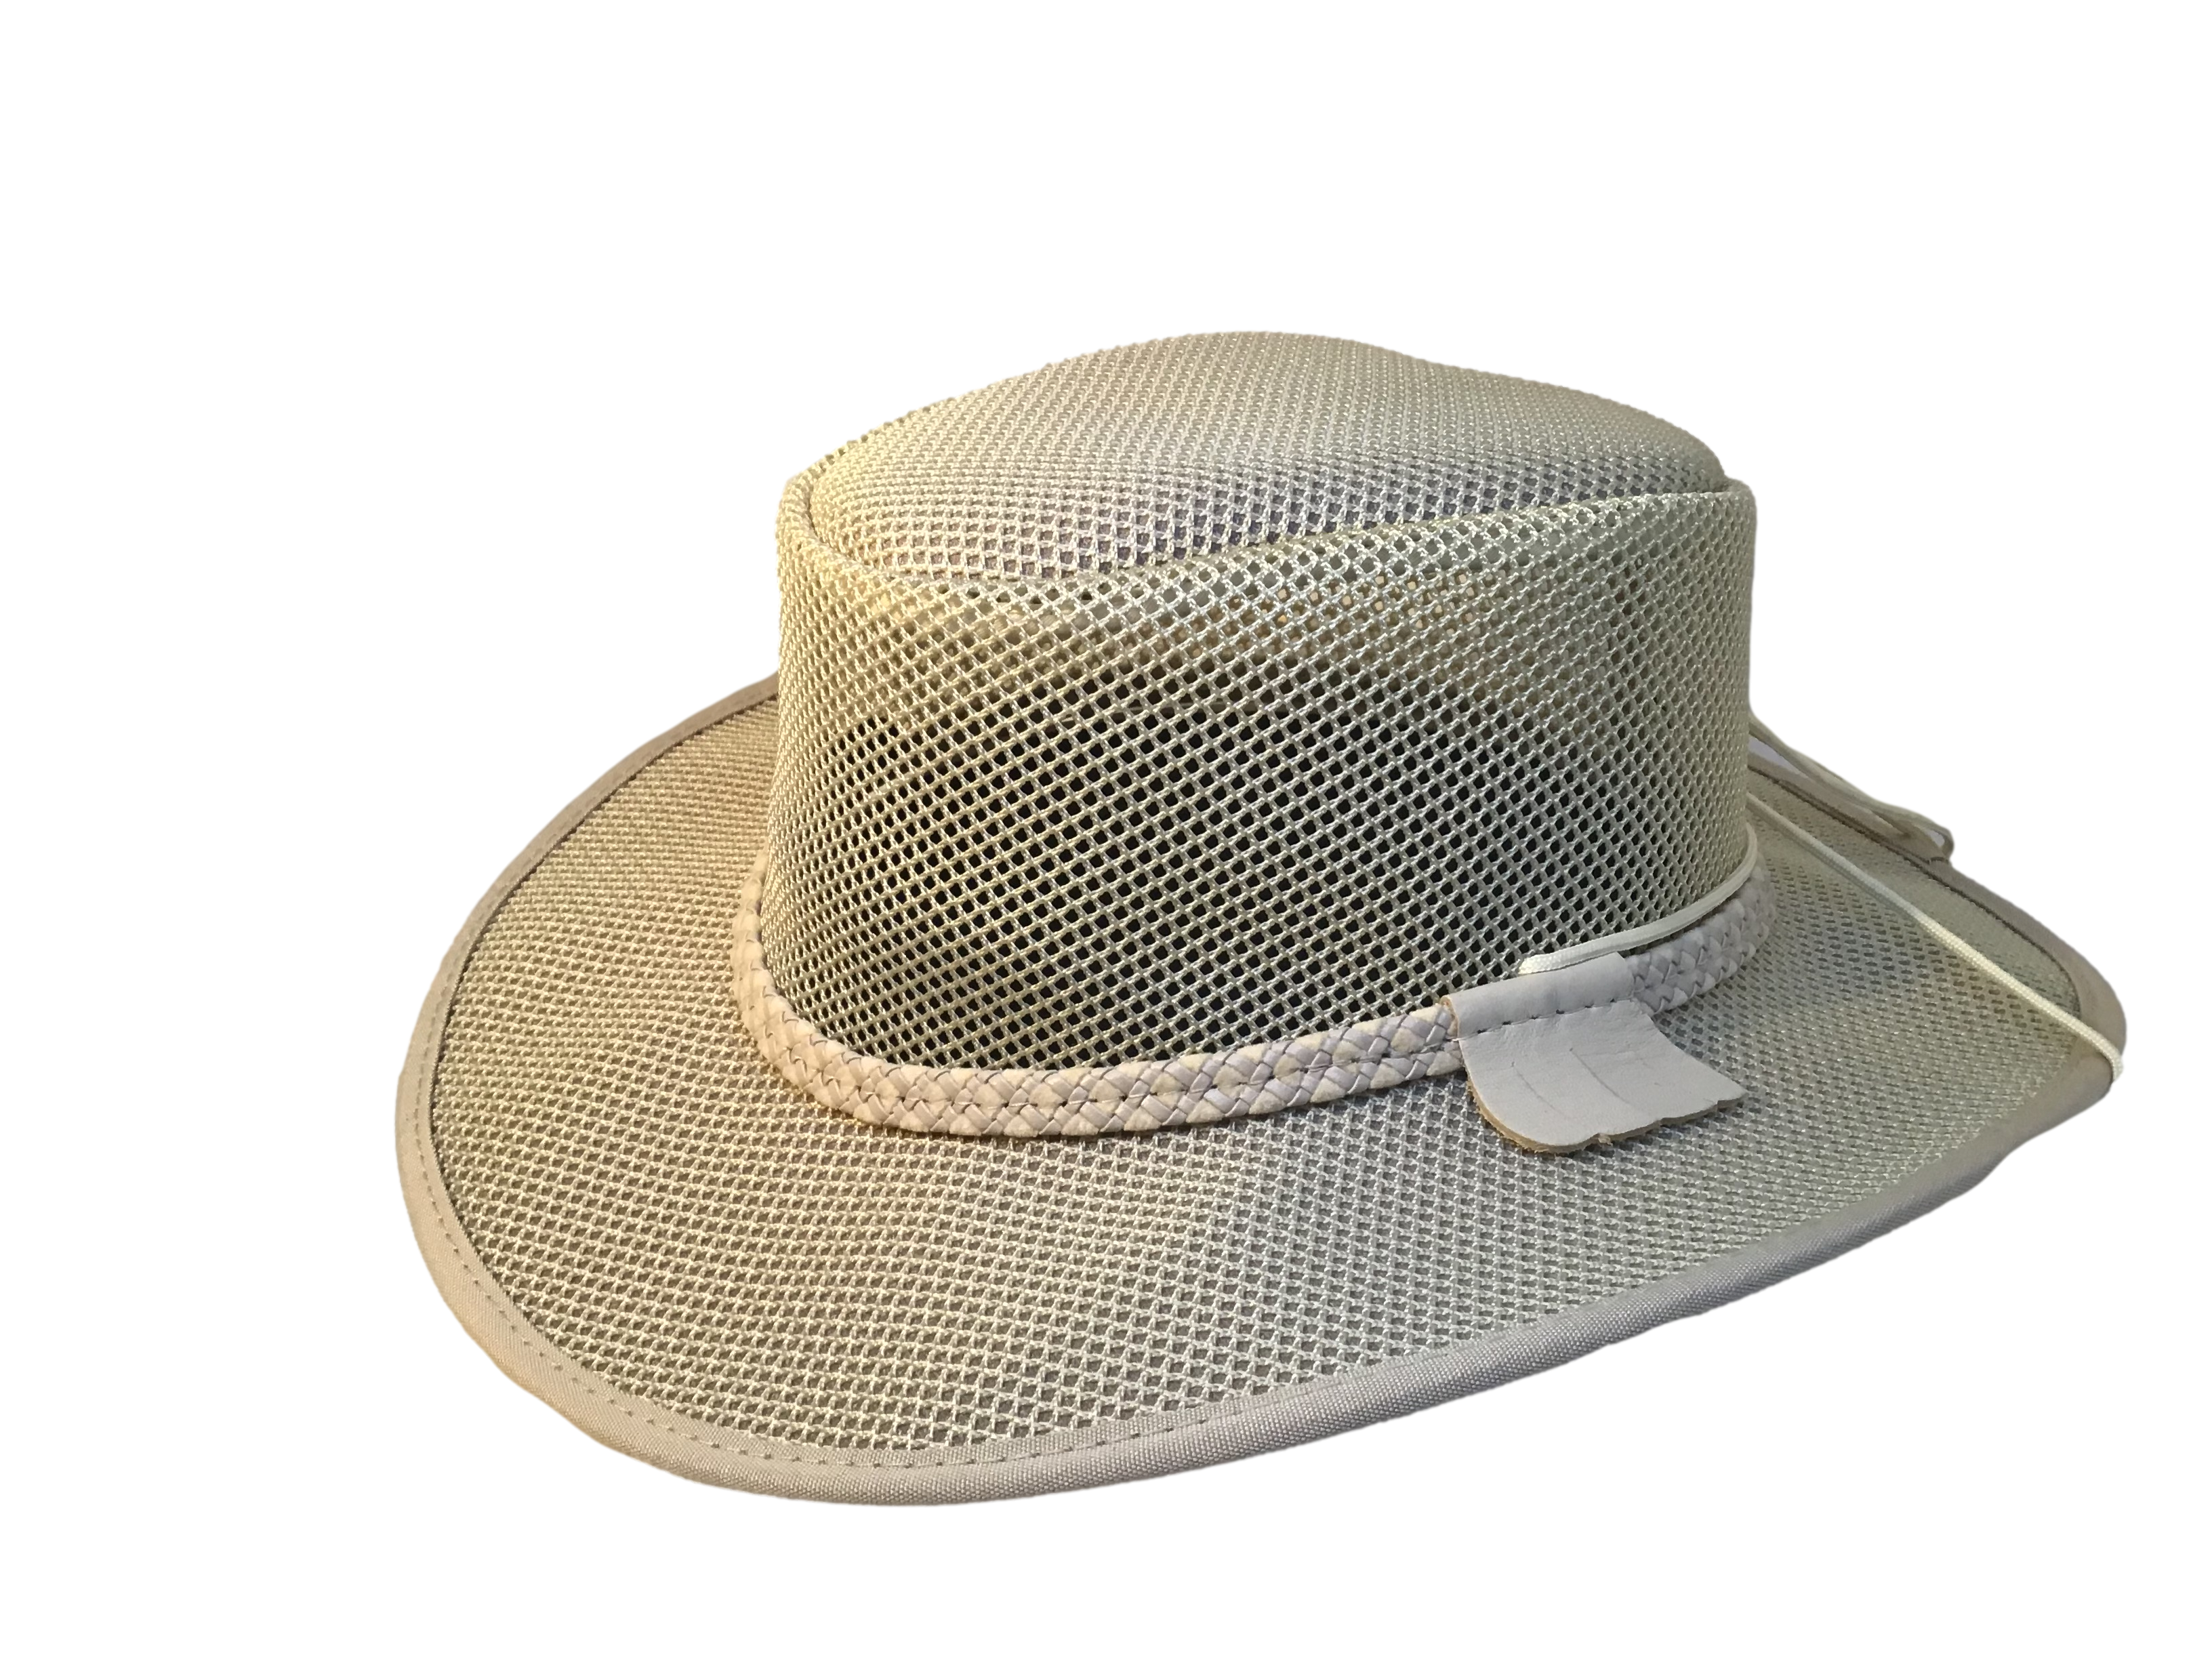 Stetson Soakable Mesh Hat Walkabout Hats, Cool Mesh Crushable hat